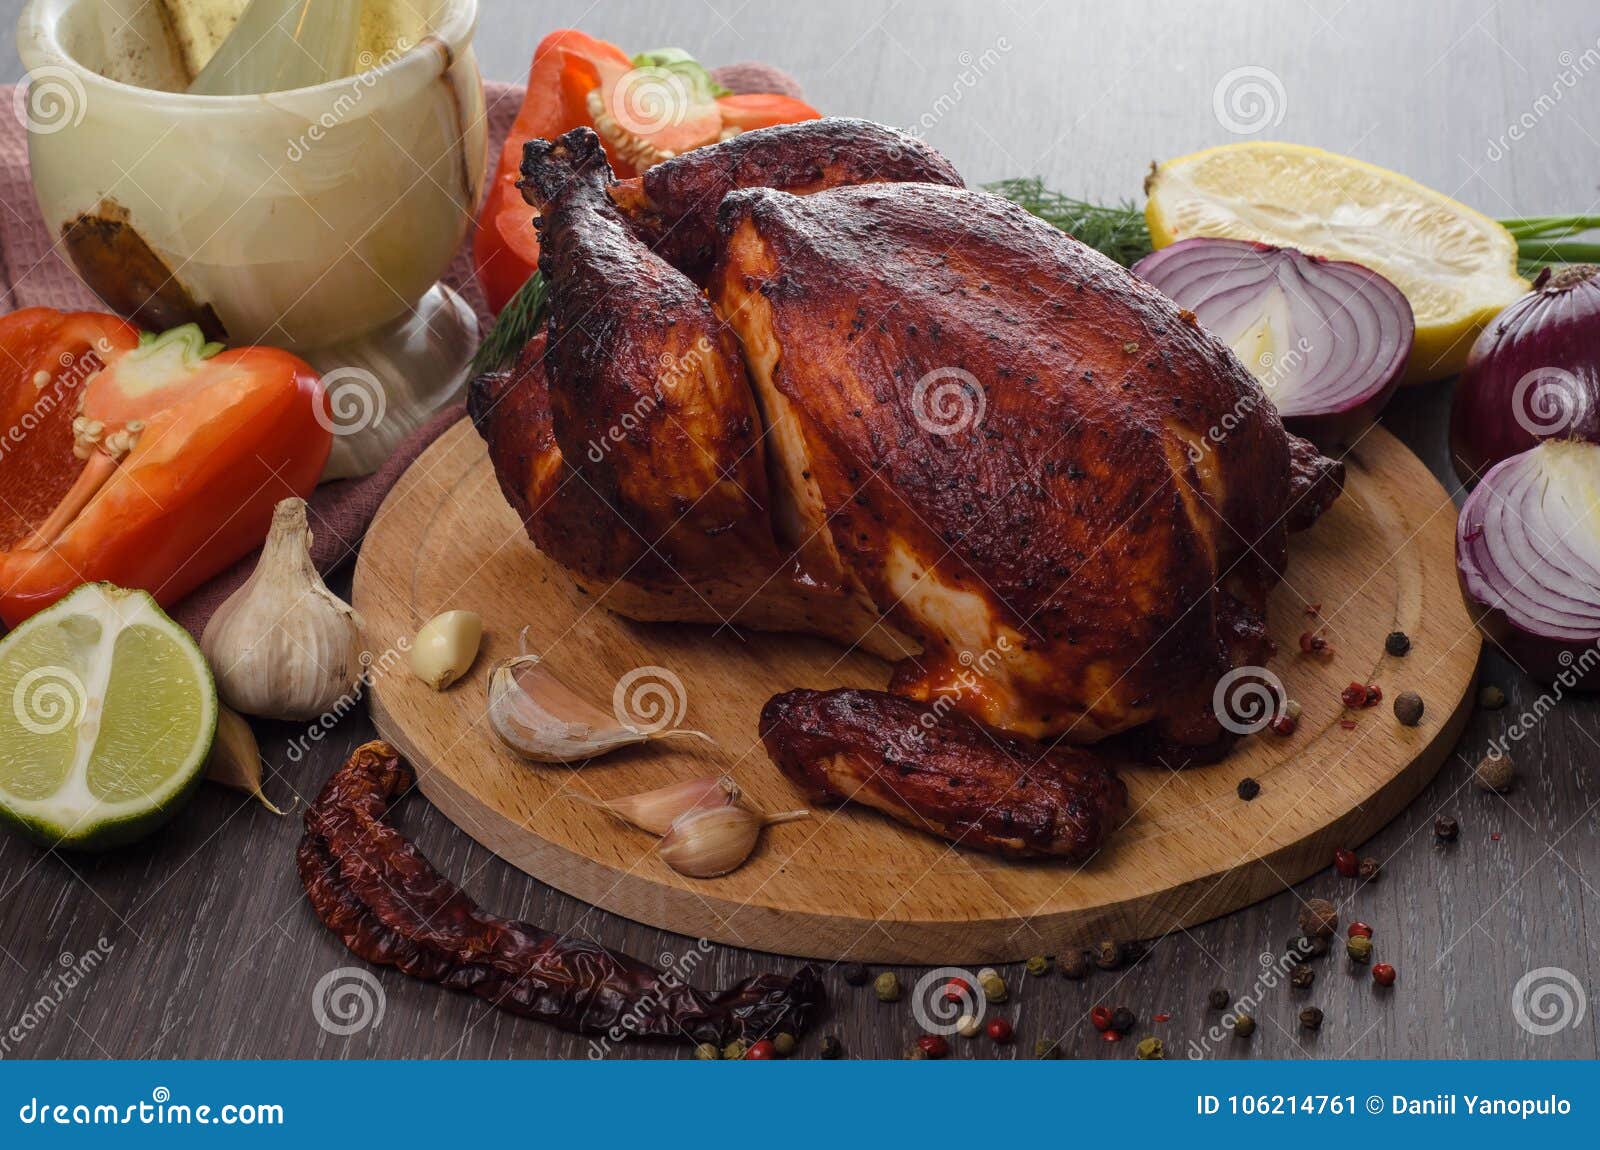 Roasted Chicken on Wooden Background Stock Image - Image of drink ...